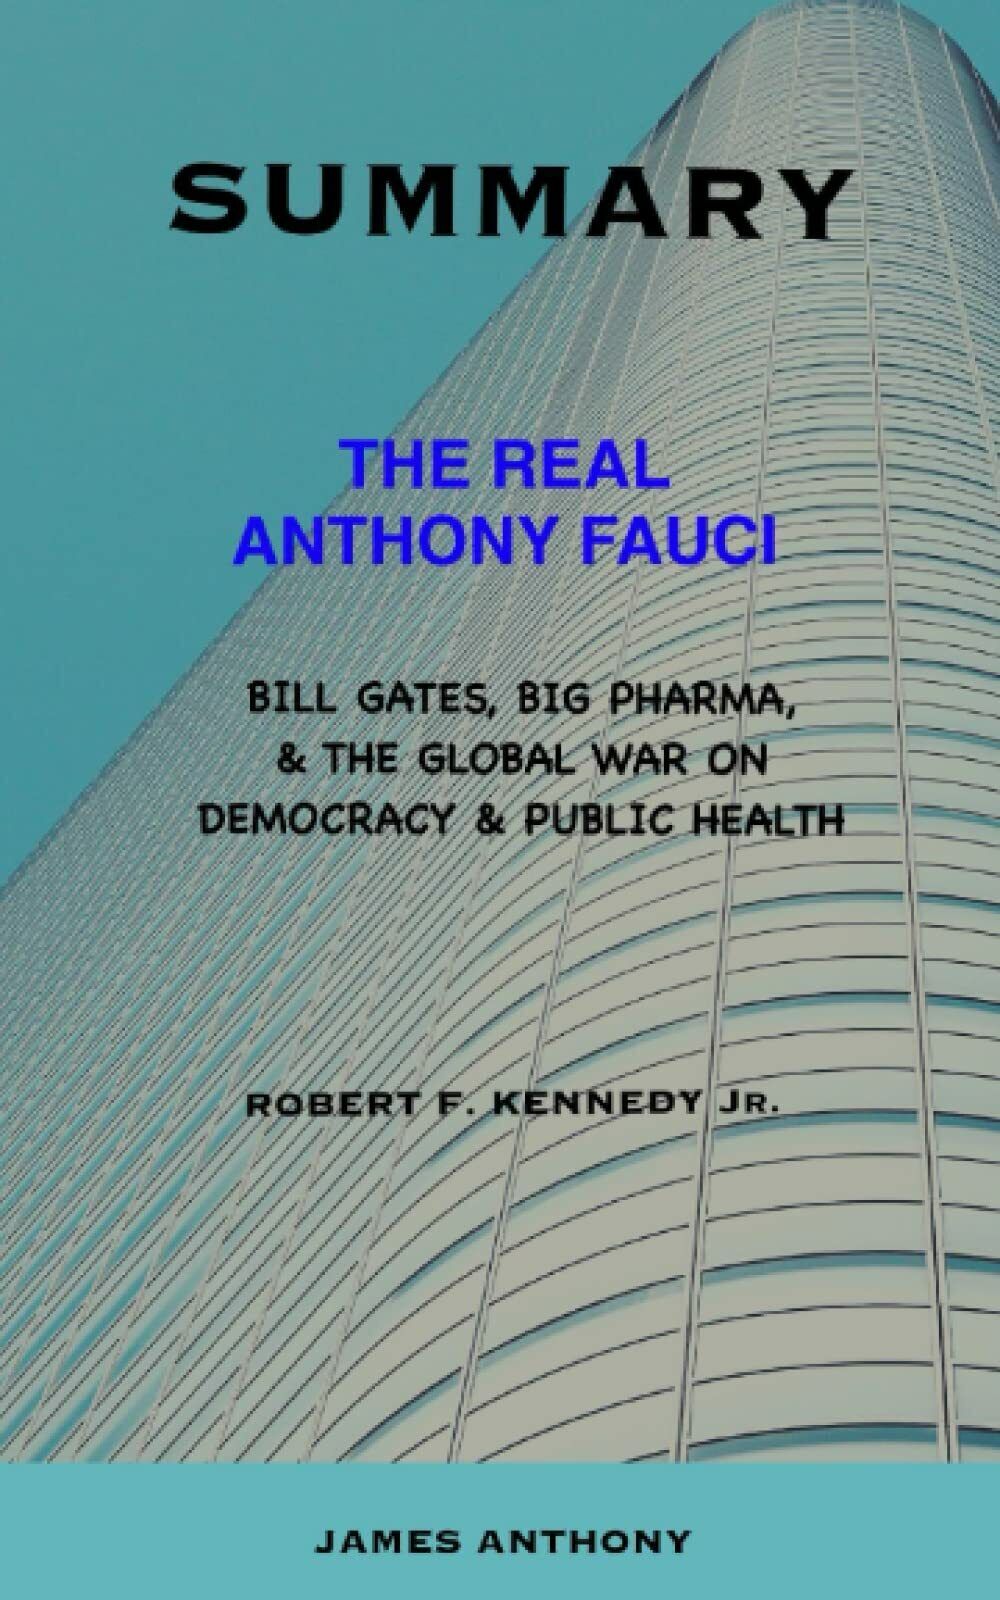 SUMMARY OF THE REAL ANTHONY FAUCI BY ROBERT F. KENNEDY JR: Bill Gates, Big Pharm